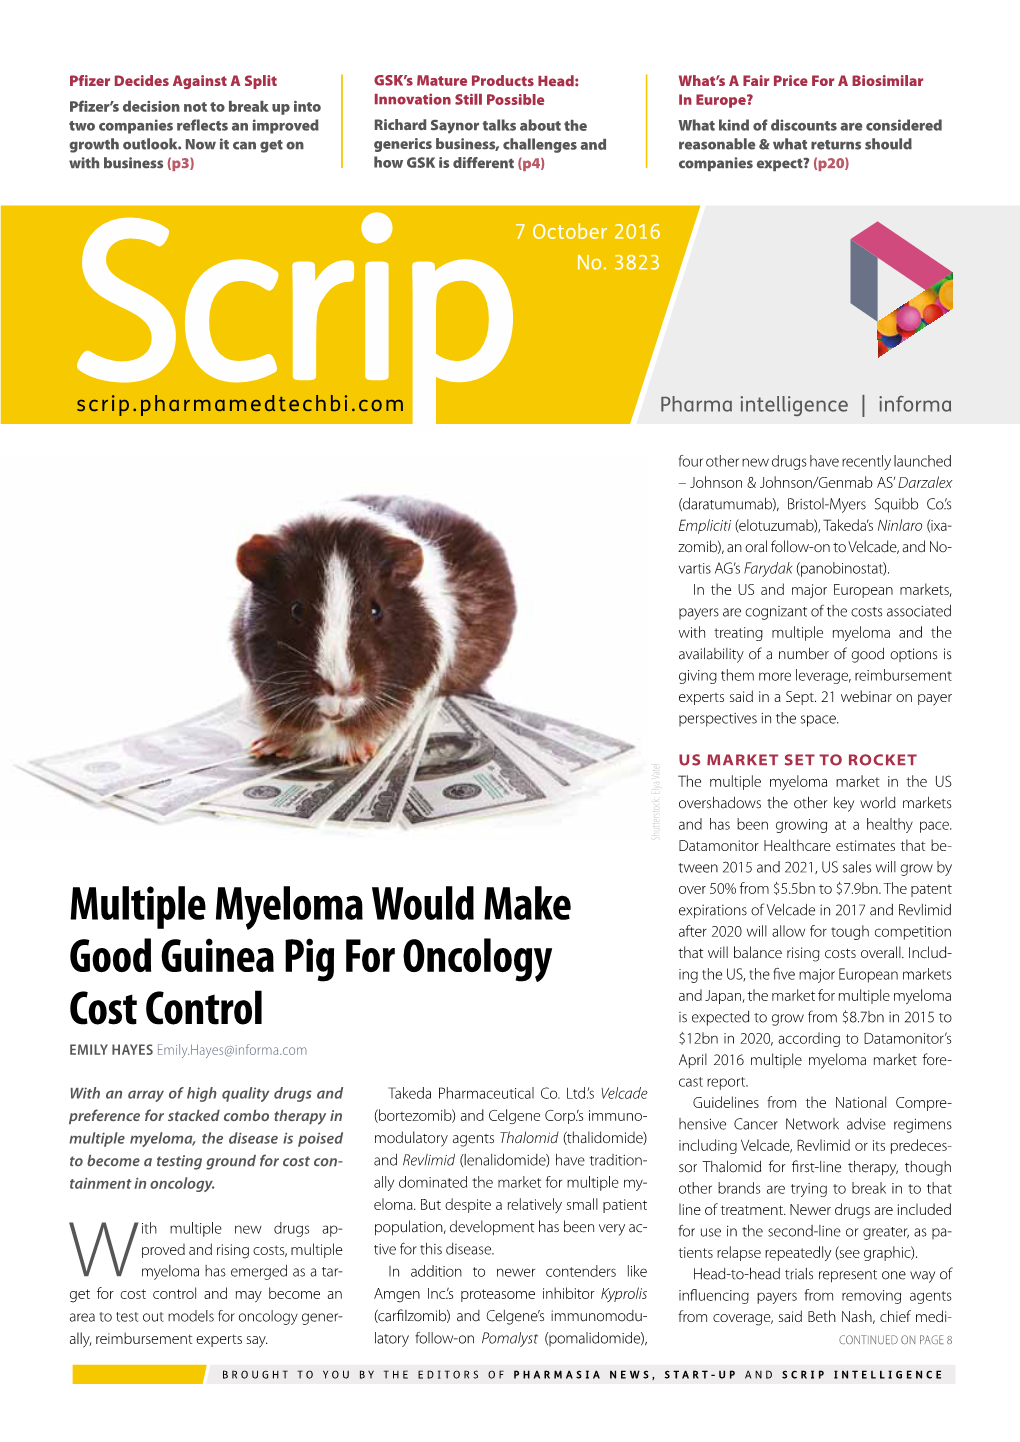 Multiple Myeloma Would Make Good Guinea Pig for Oncology Cost Control